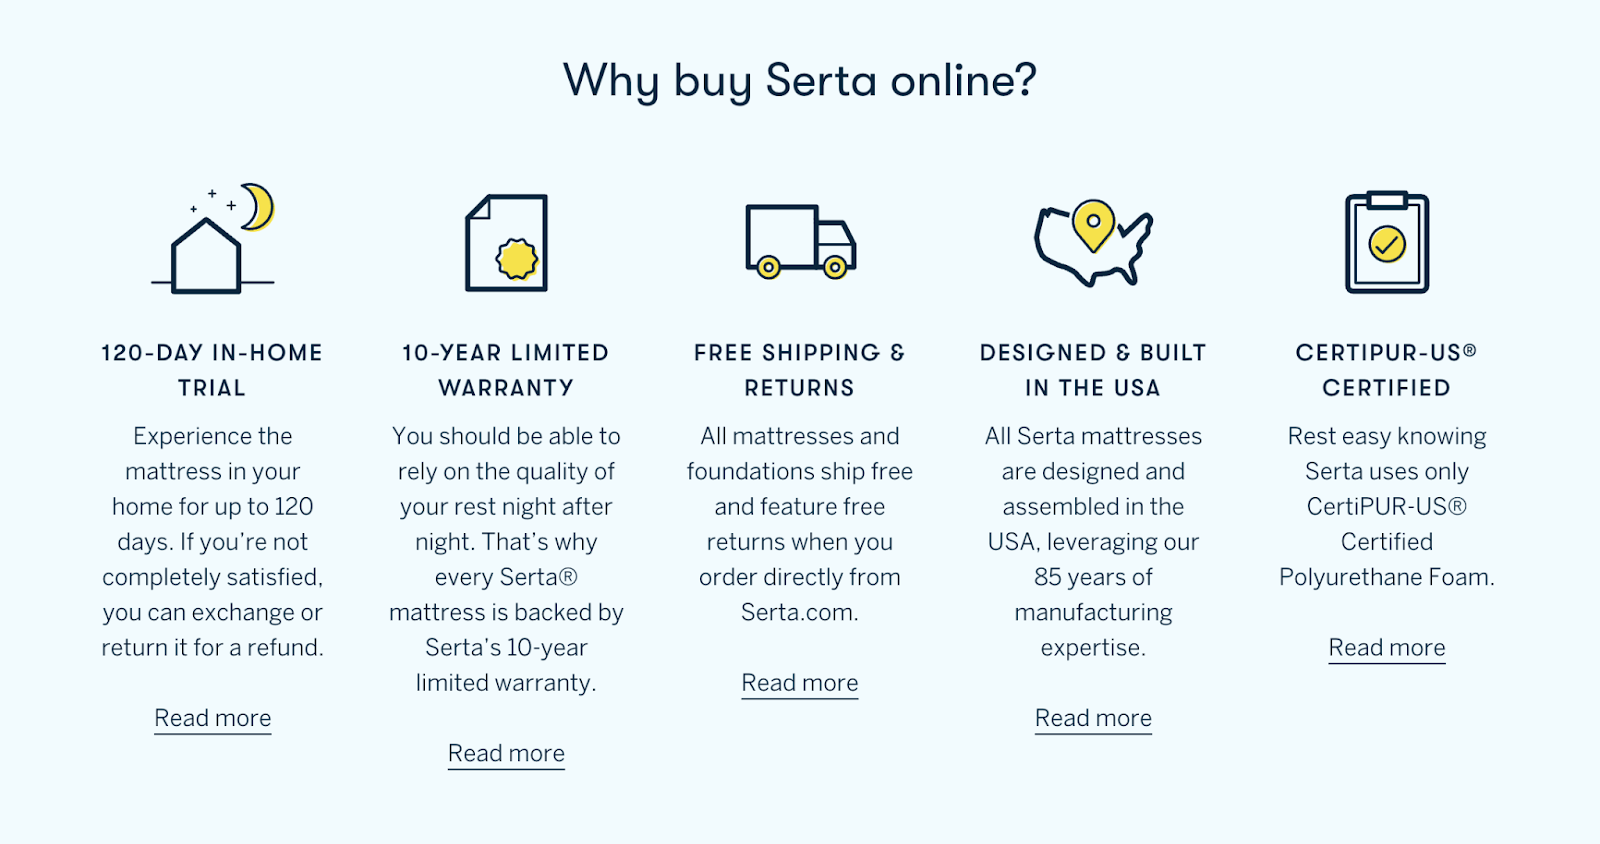 "Why buy Serta online" section of the page